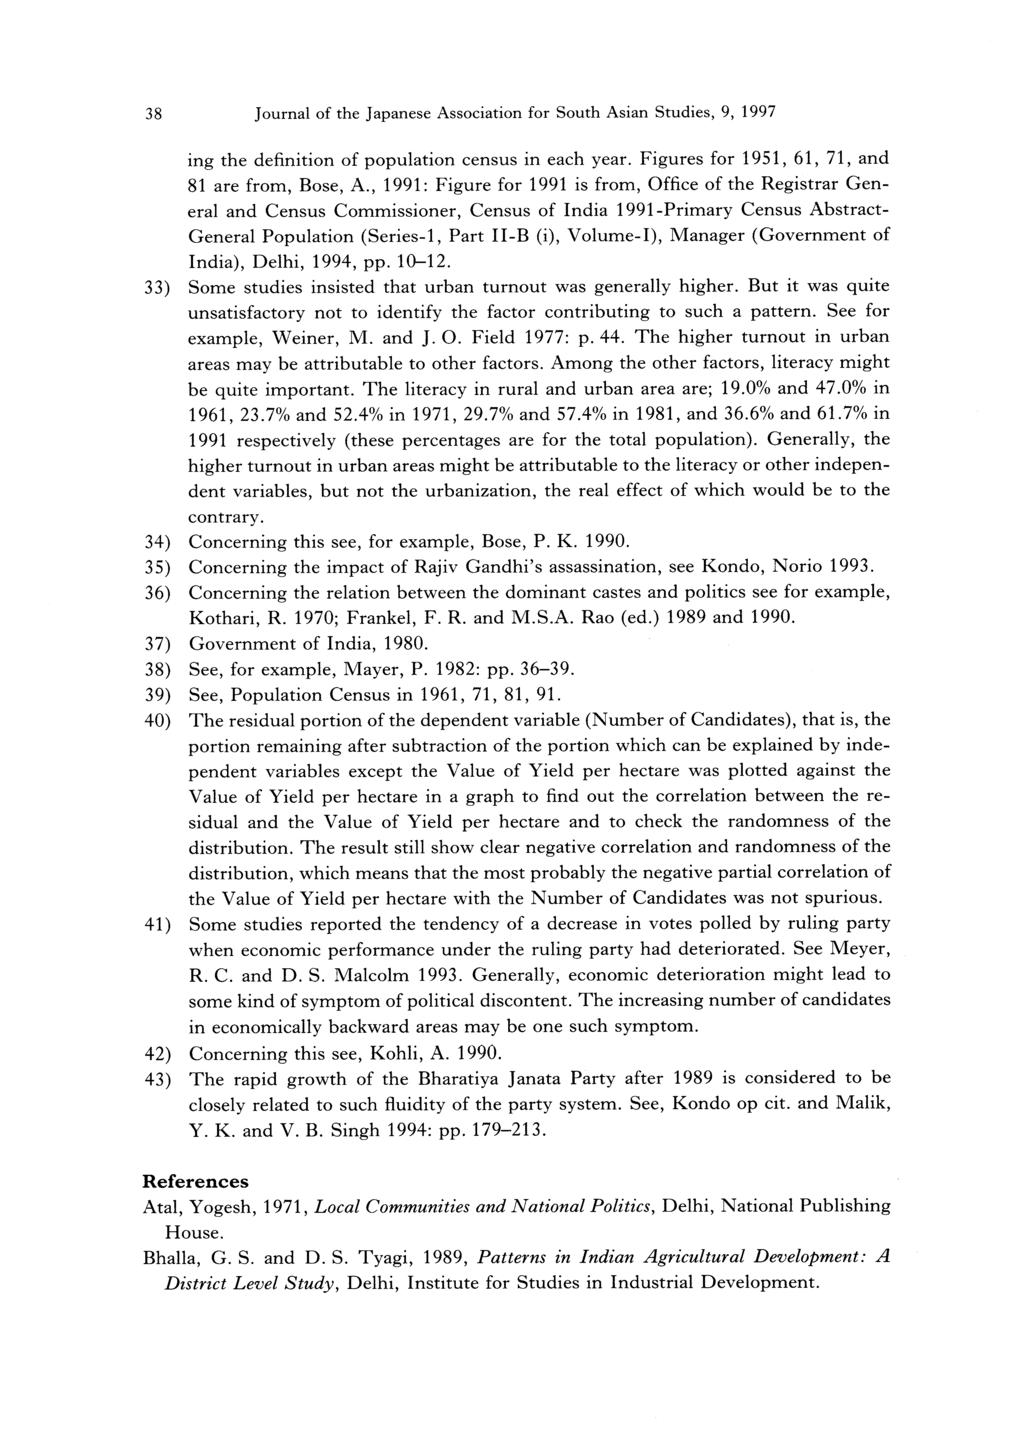 38 Journal of the Japanese Association for South Asian Studies, 9, 1997 ing the definition of population census in each year. Figures for 1951, 61, 71, and 81 are from, Bose, A.